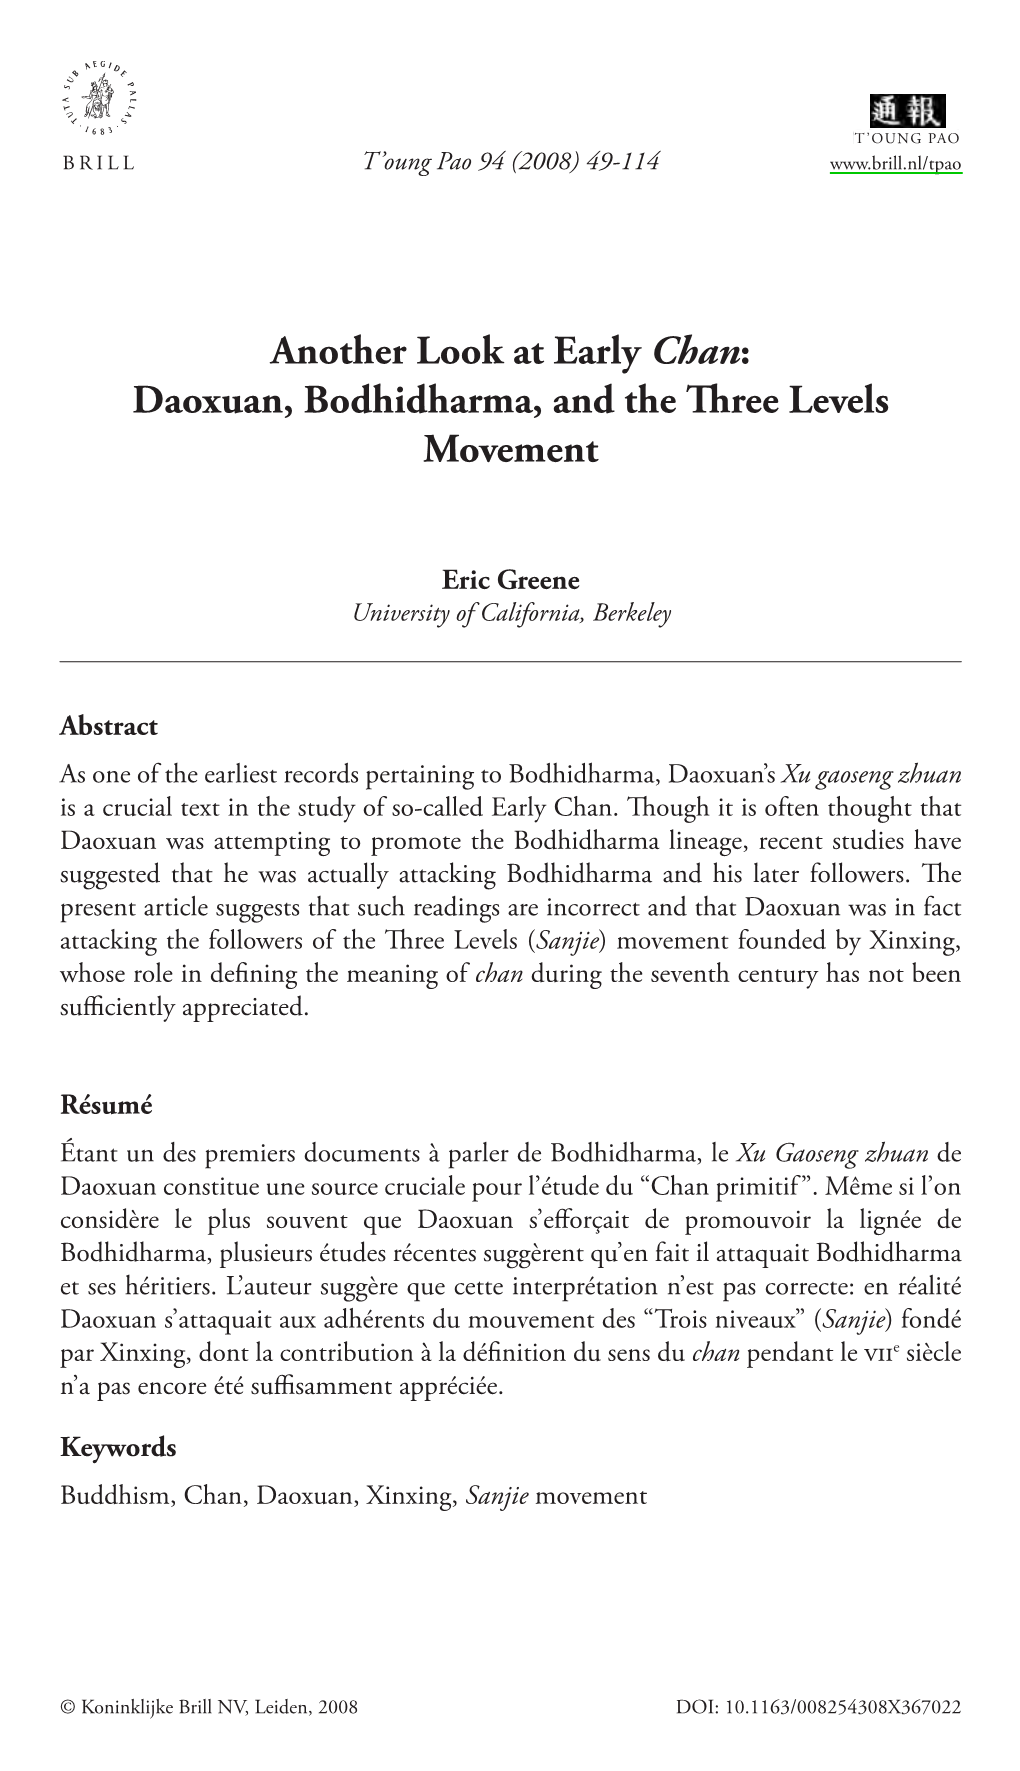 Another Look at Early Chan: Daoxuan, Bodhidharma, and the Three Levels Movement